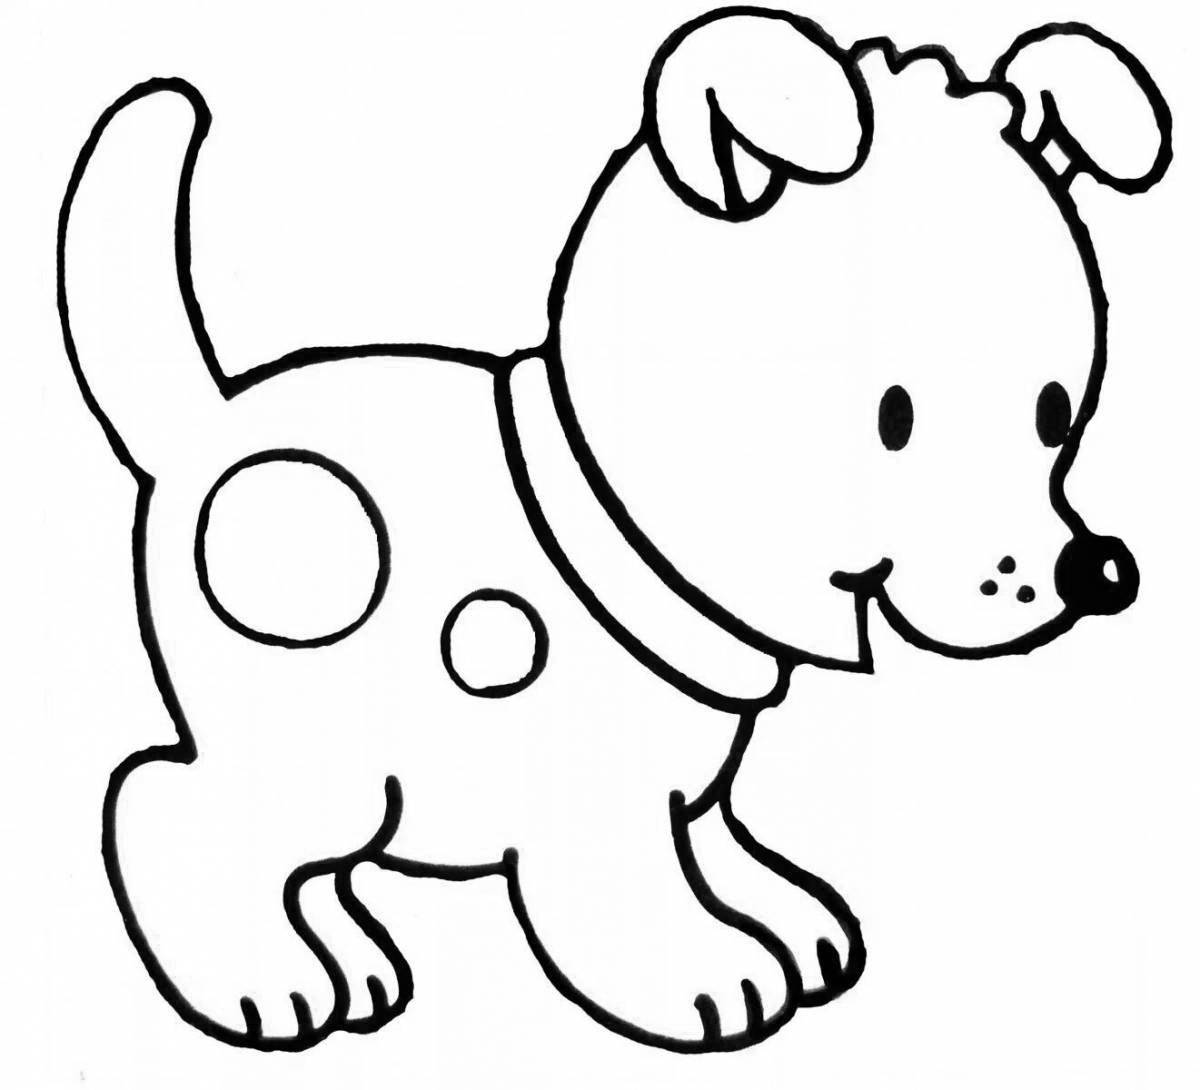 Live coloring dog for children 2-3 years old